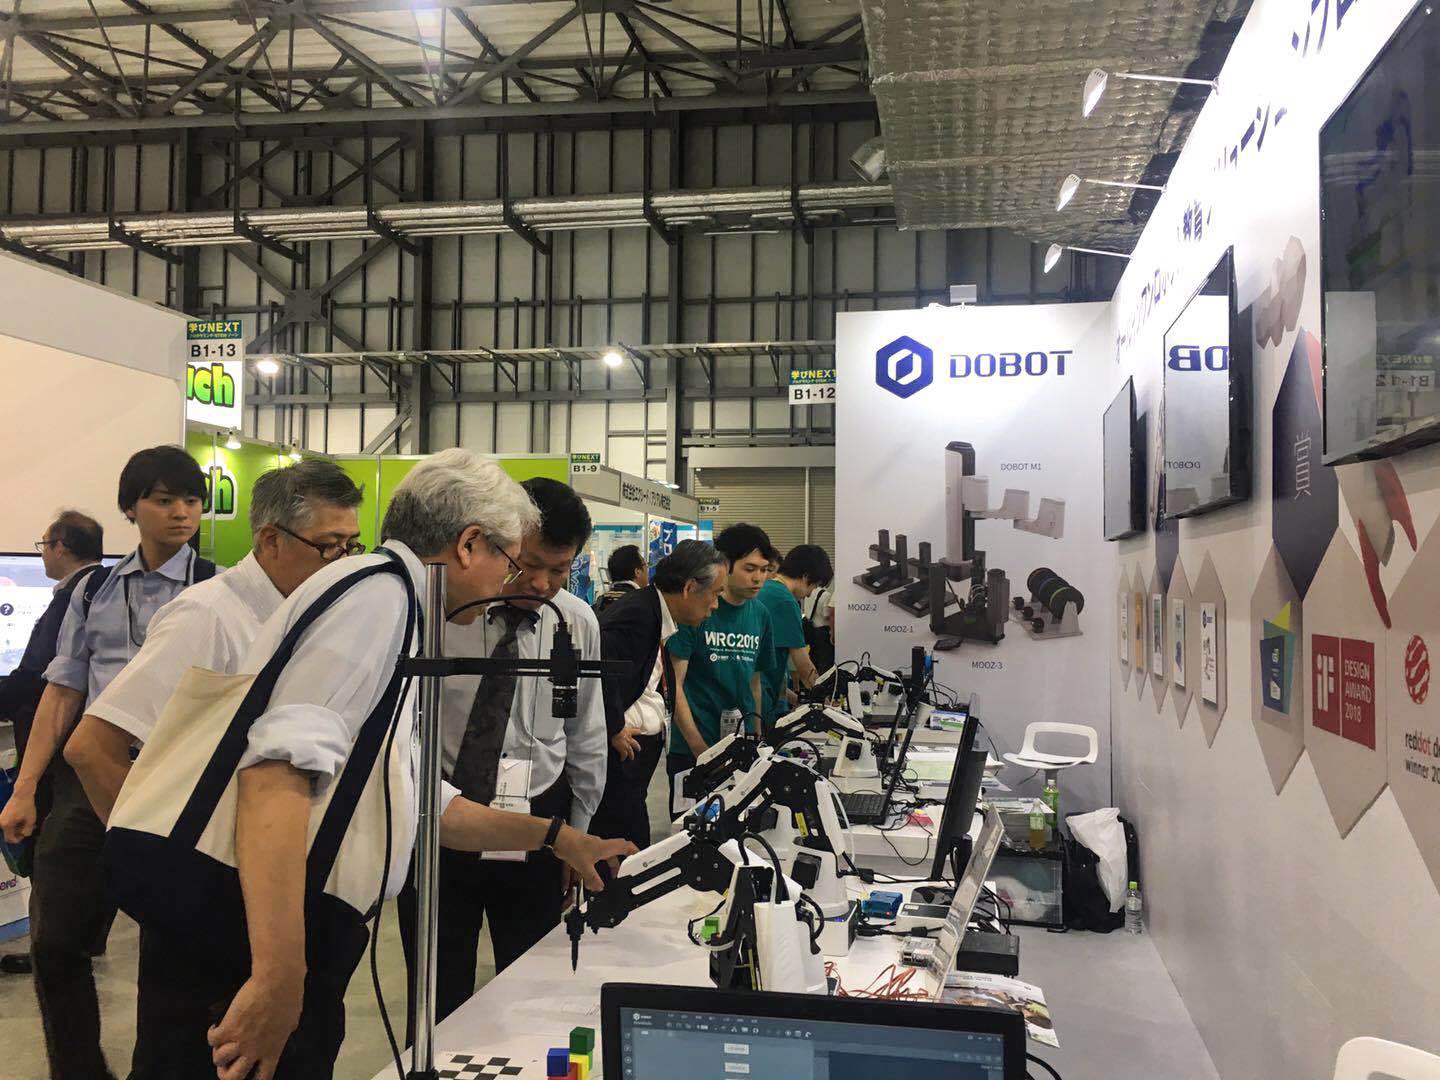 Dobot Shined at EDIX Tokyo 2019 with Its Latest Robot Solutions for Education